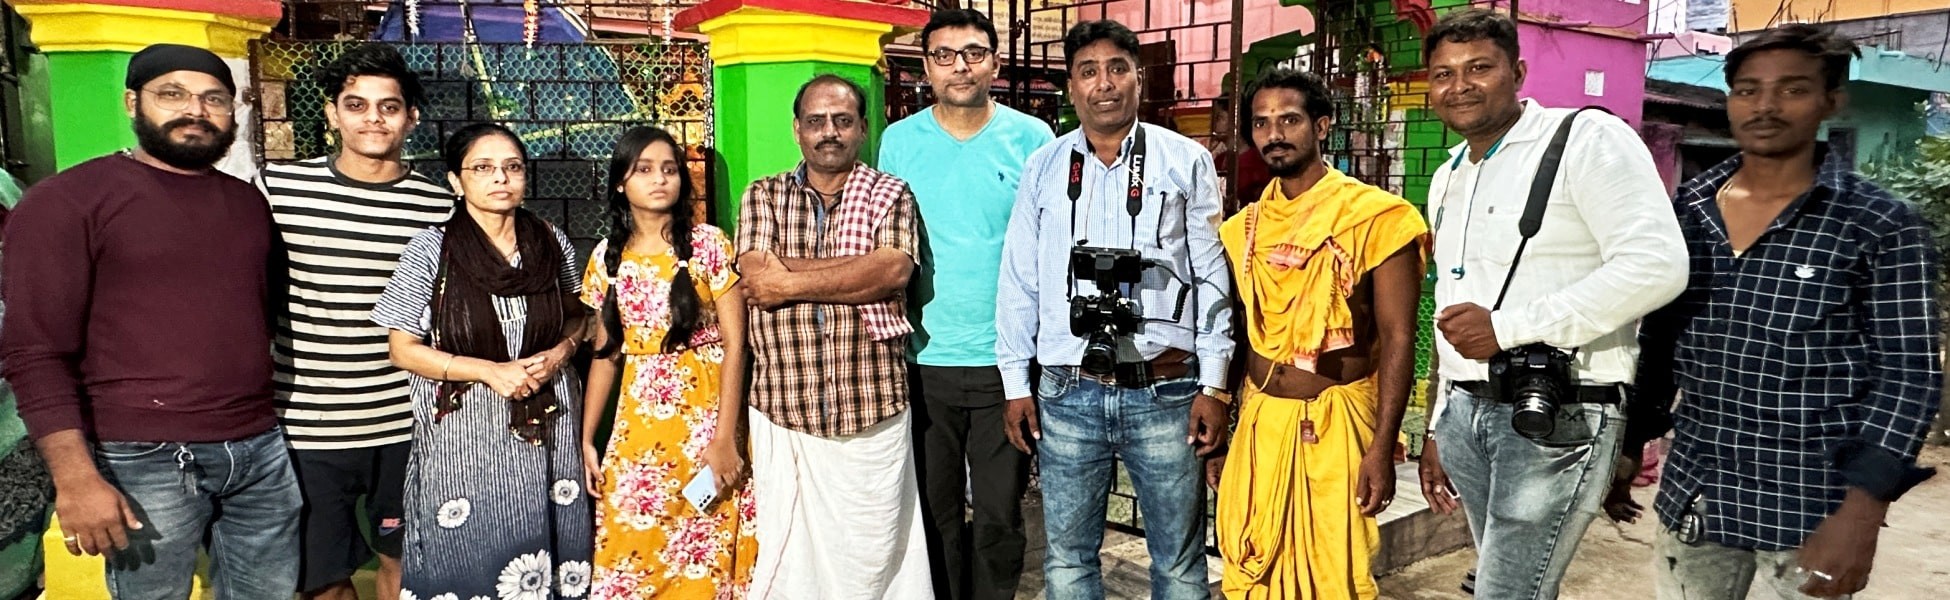 film production house in Puri, video production house in Puri, tv production house in Puri, production house in Puri, film production company in Puri, video production company in Puri, tv production company in Puri, production company in Puri